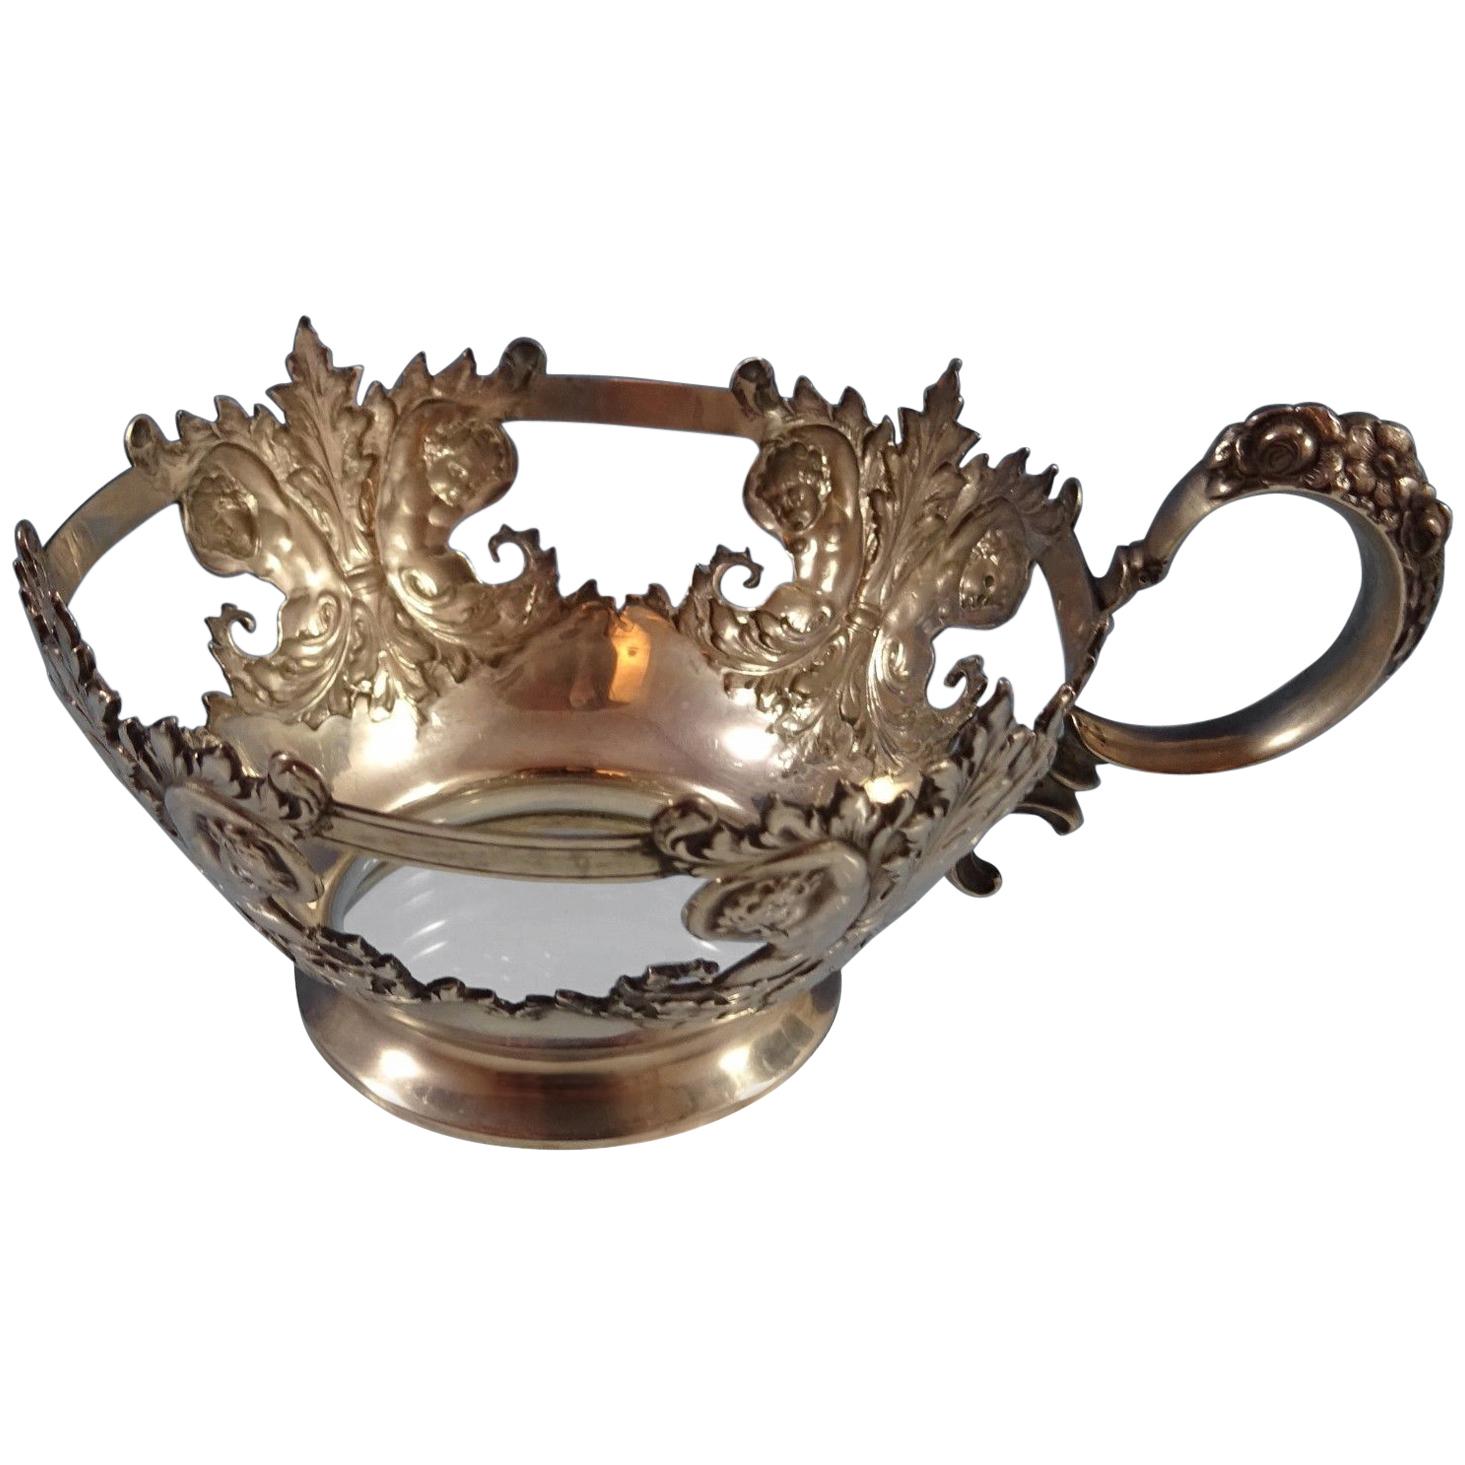 Tiffany & Co. Sterling Silver Bouillon Cup with Cherubs Figural SKU #1141